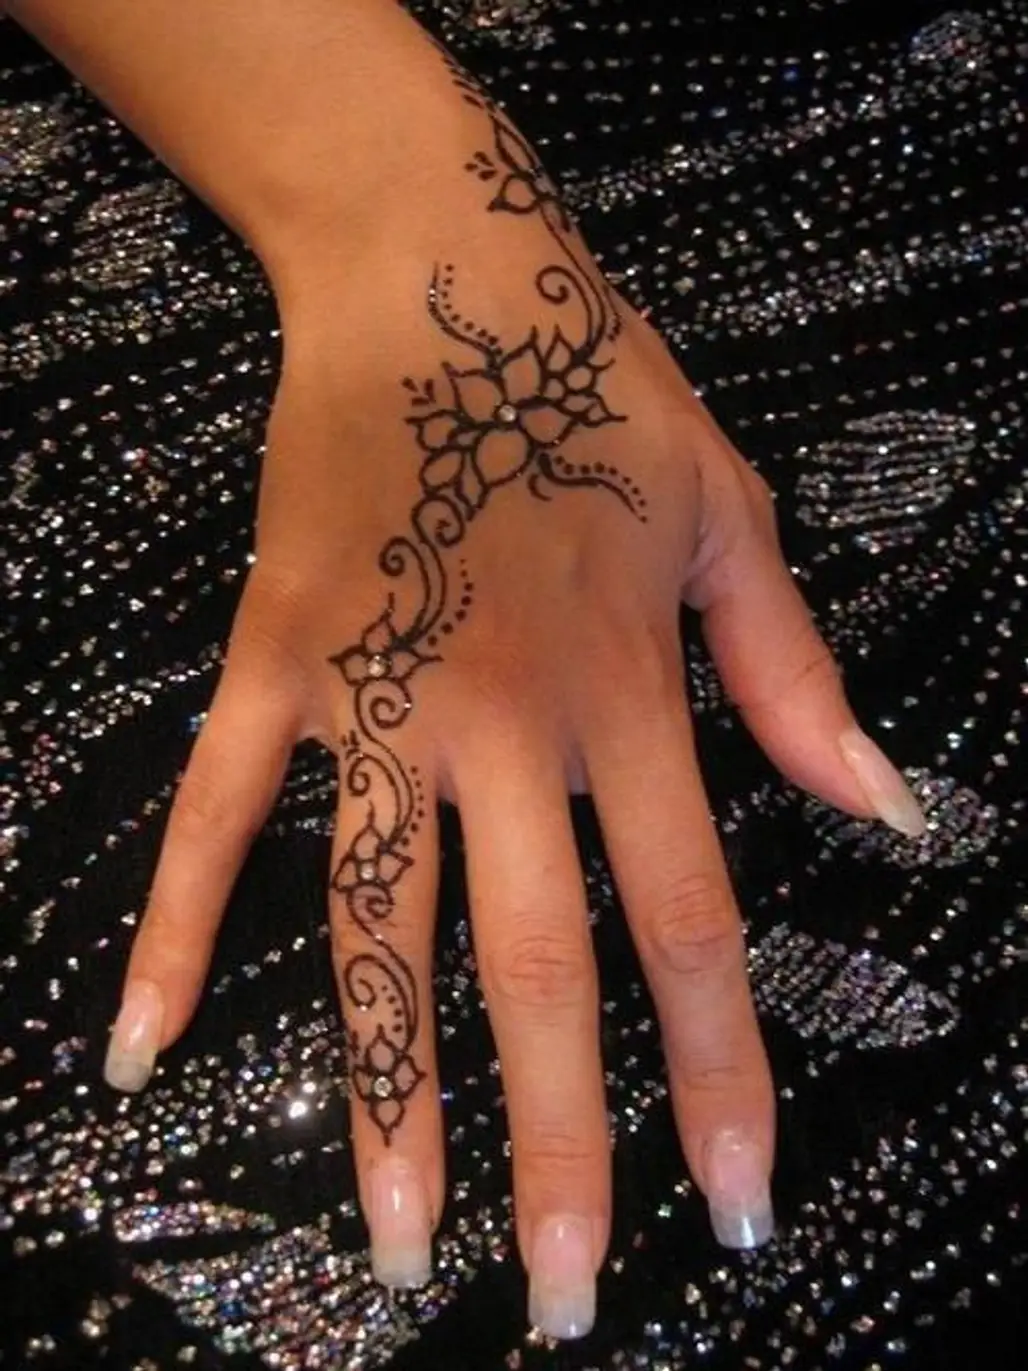 How Long Does a Henna Tattoo Last For? – Lydi's Mehndi Designs